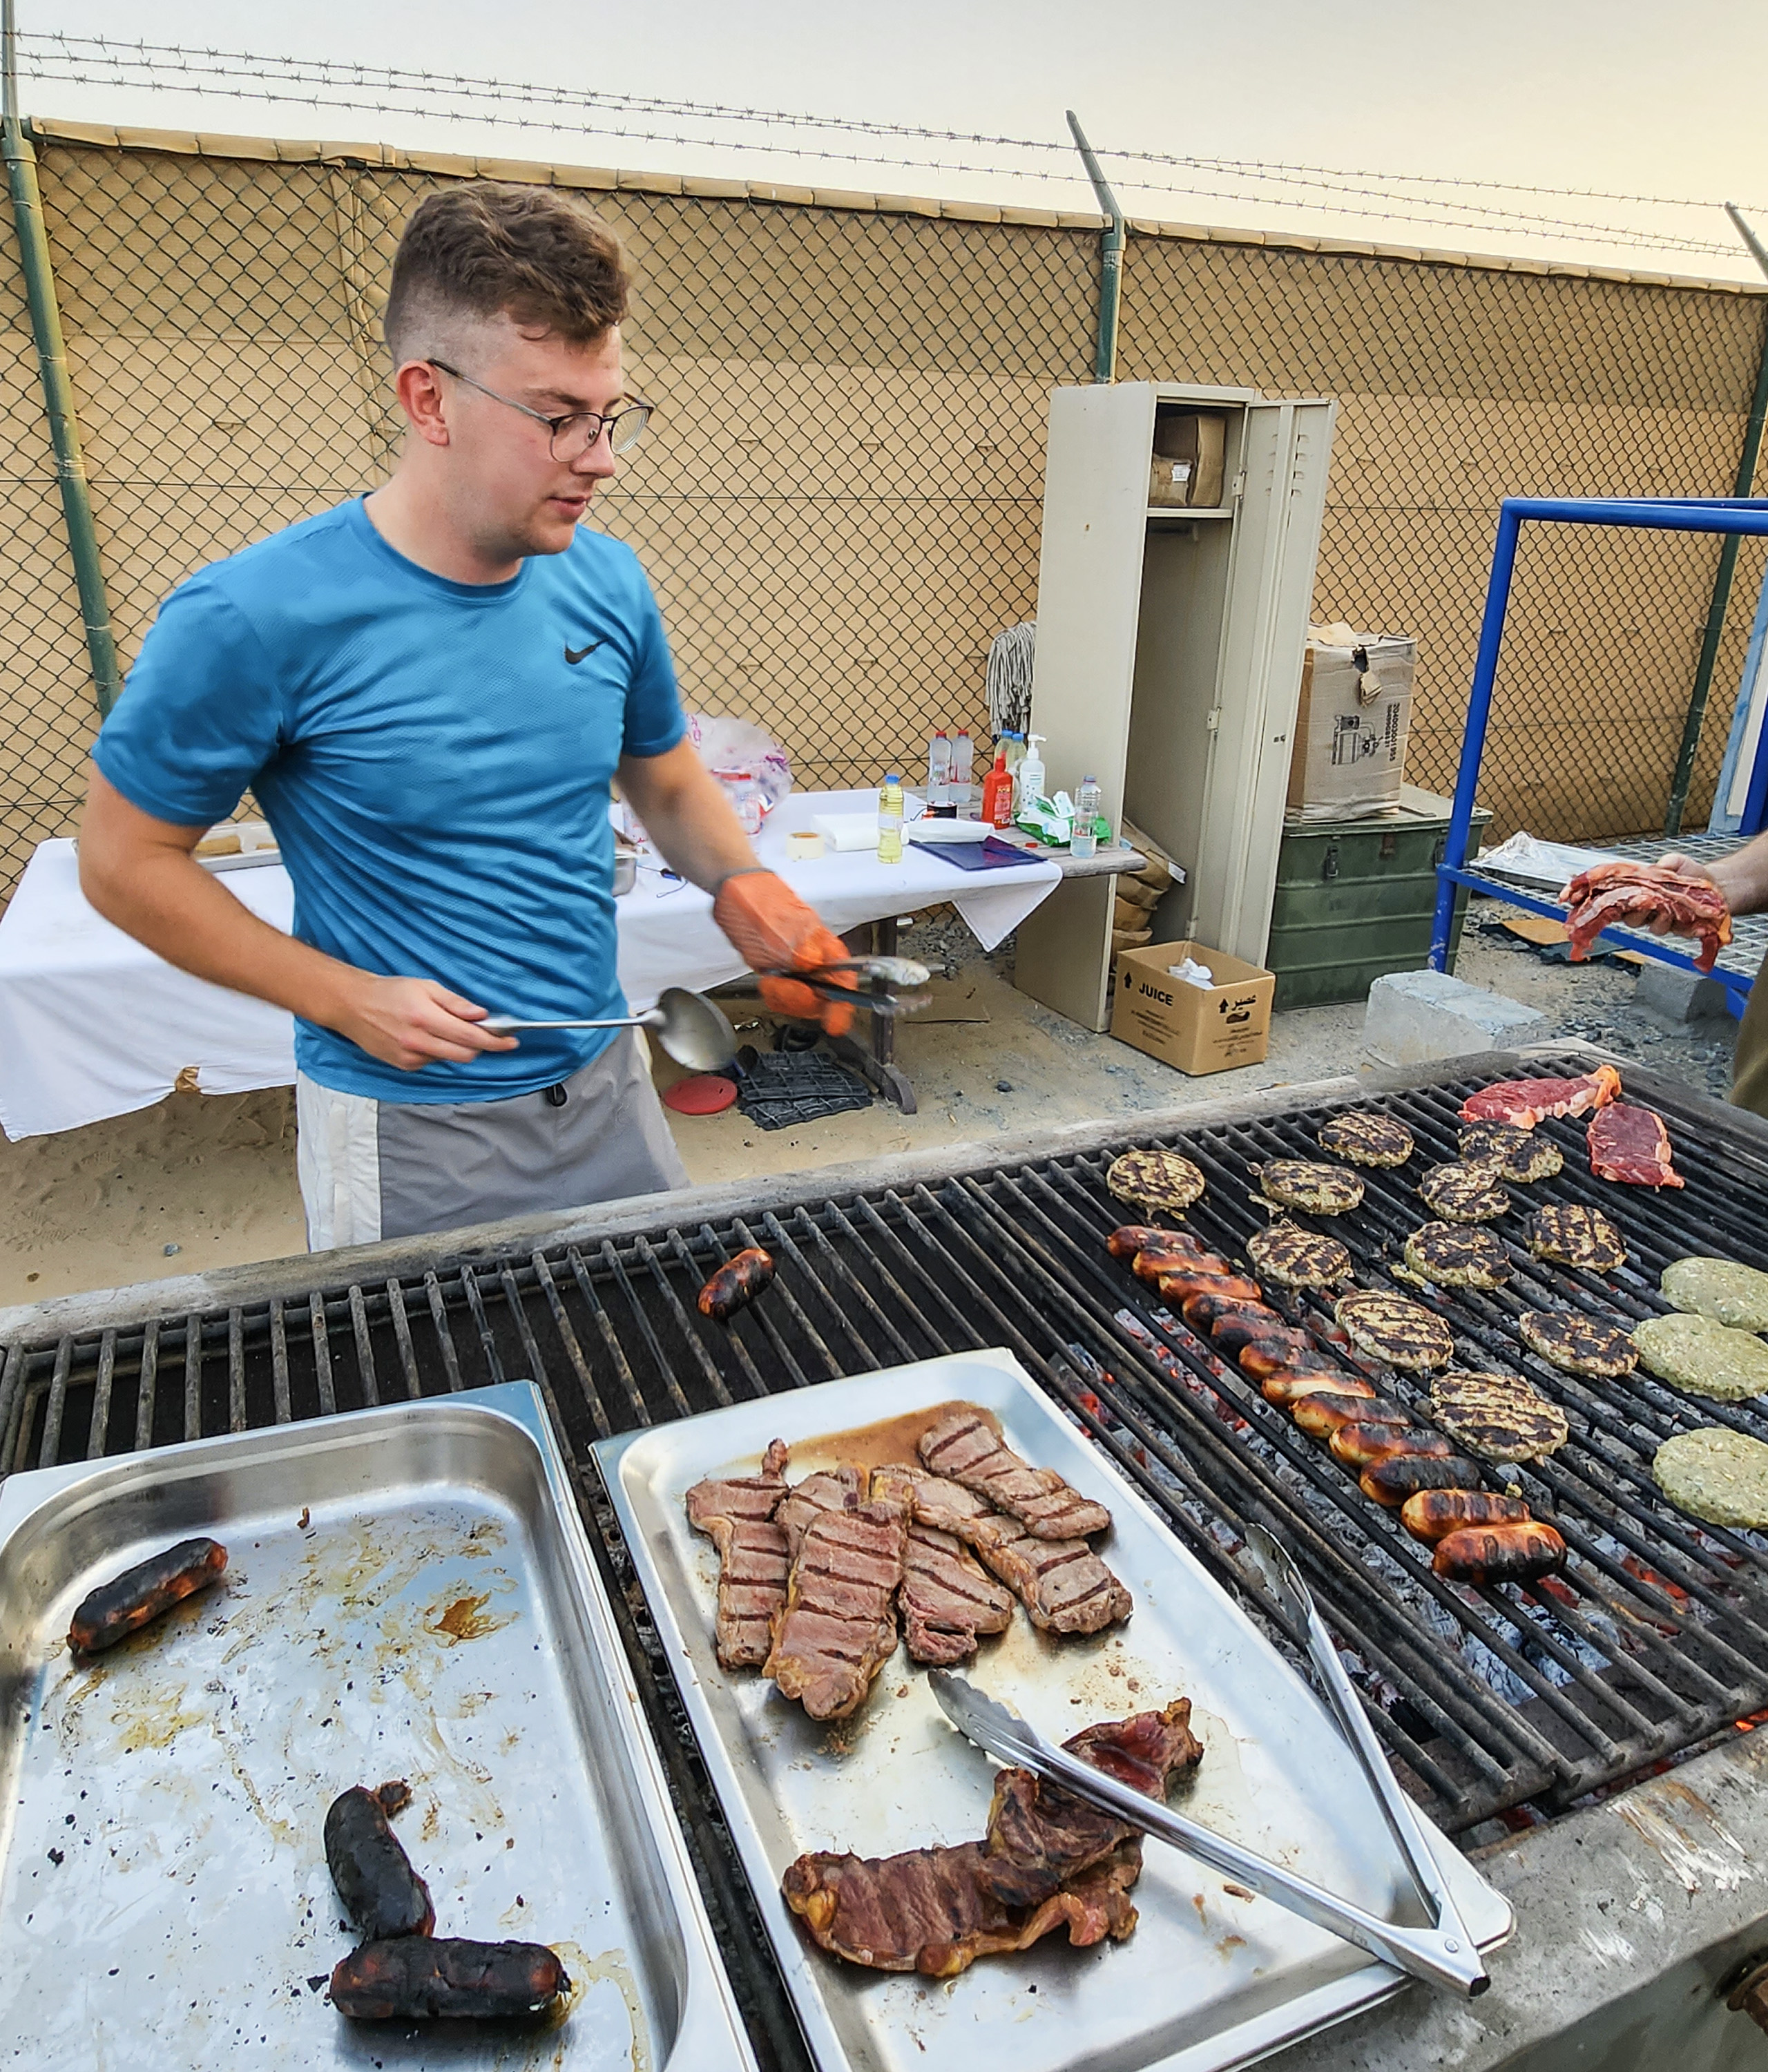 Image shows civilian at a barbecue grill cooking food.. 